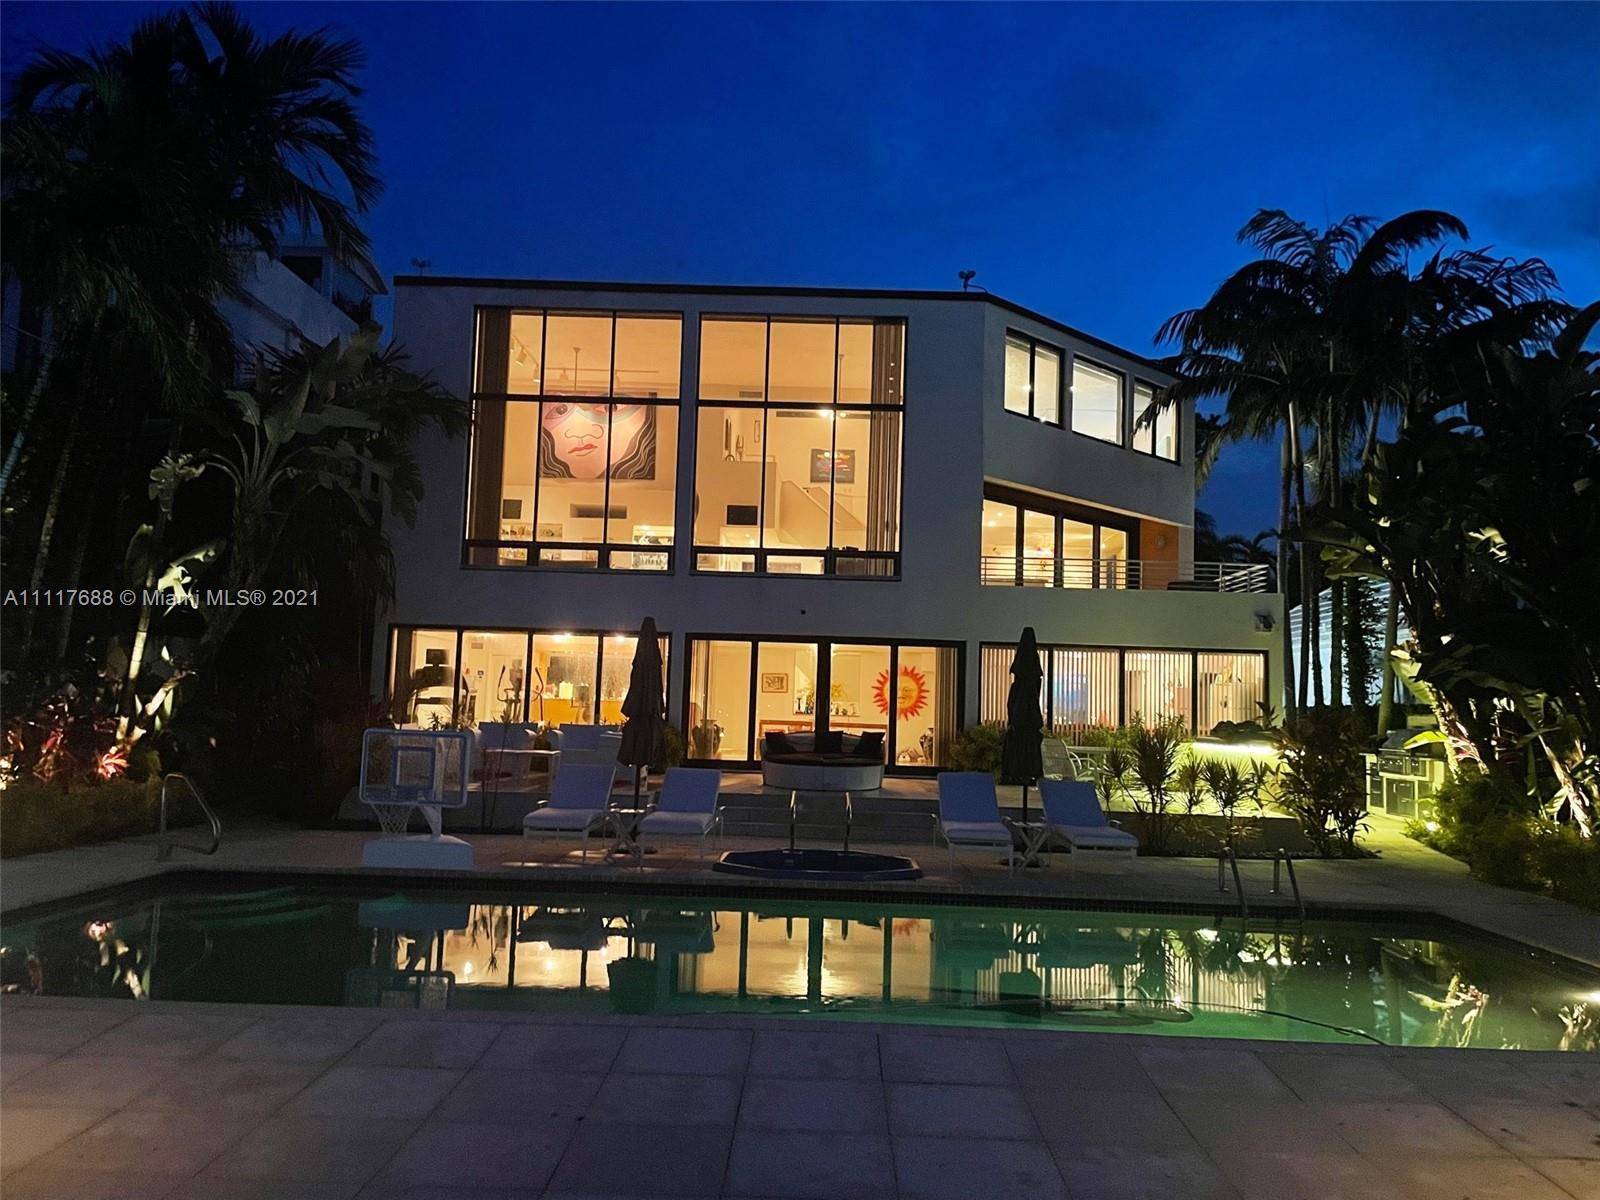 A dramatic custom built architect s waterfront 3 story timeless custom gem featured on Miami Vice and in the Miami Herald.